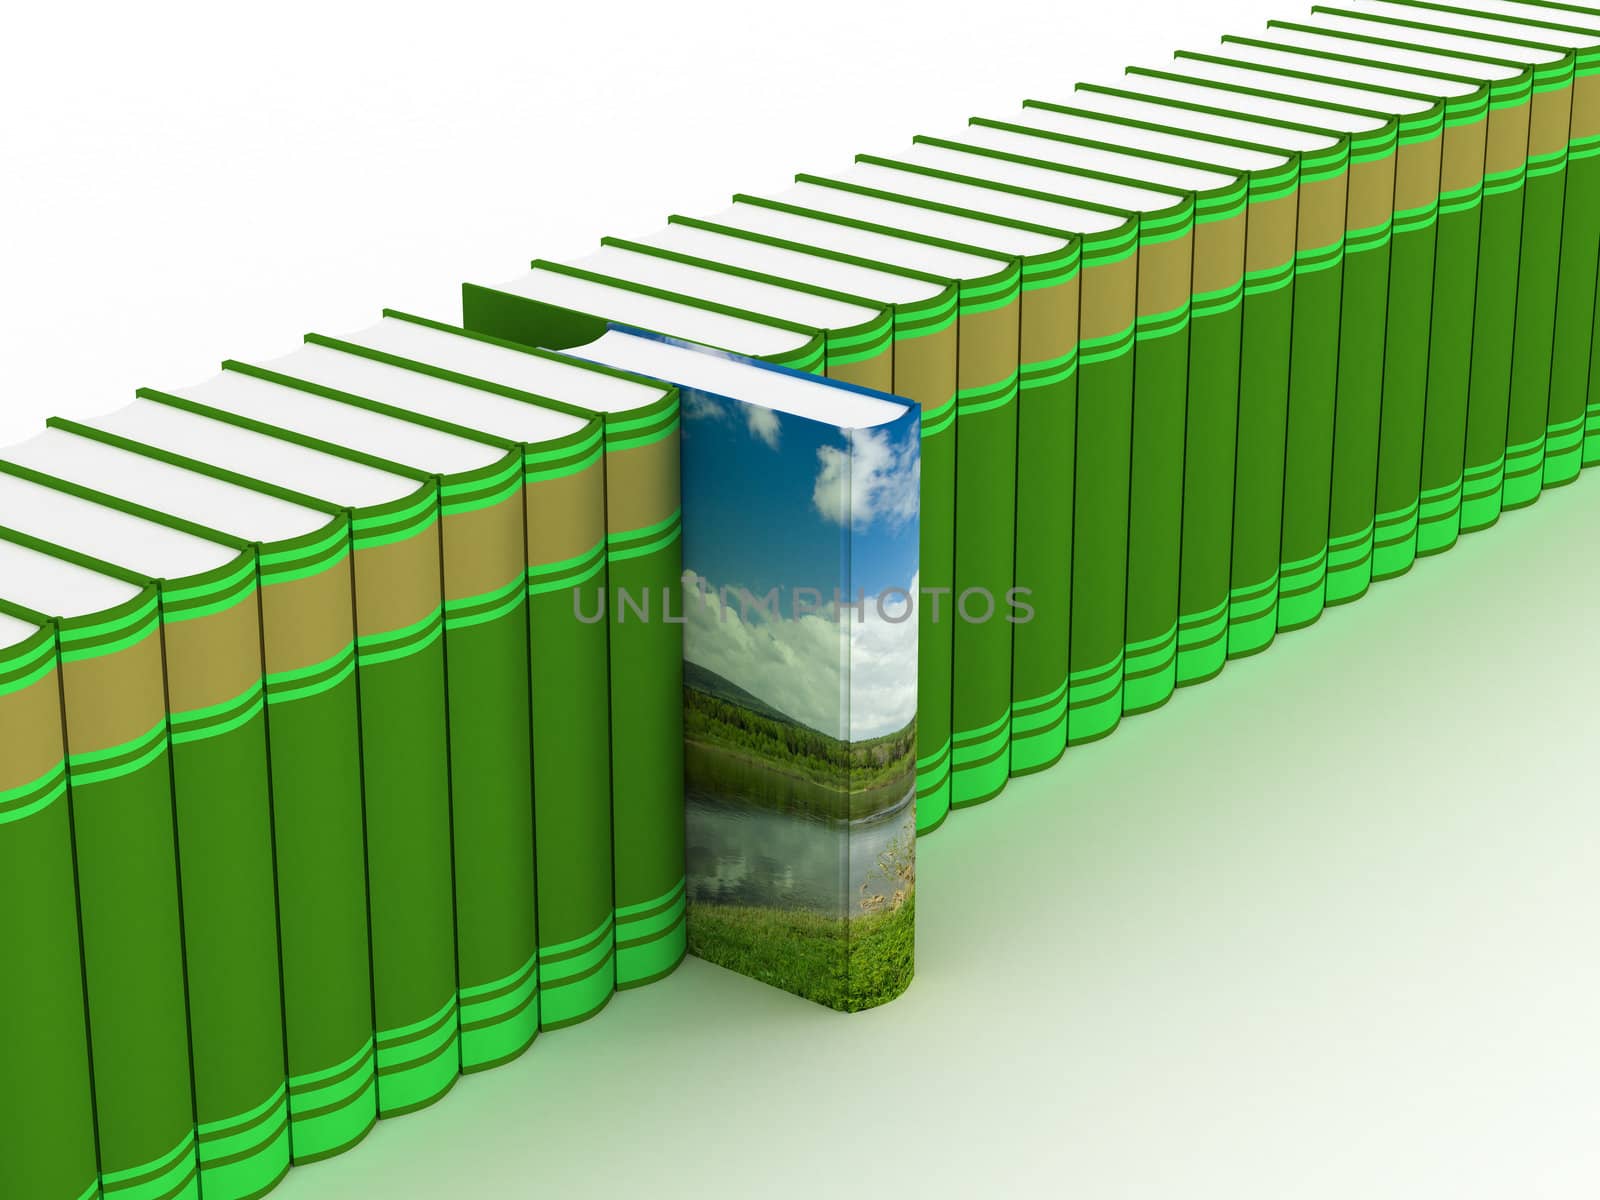 Row of books on a white background. 3D image.